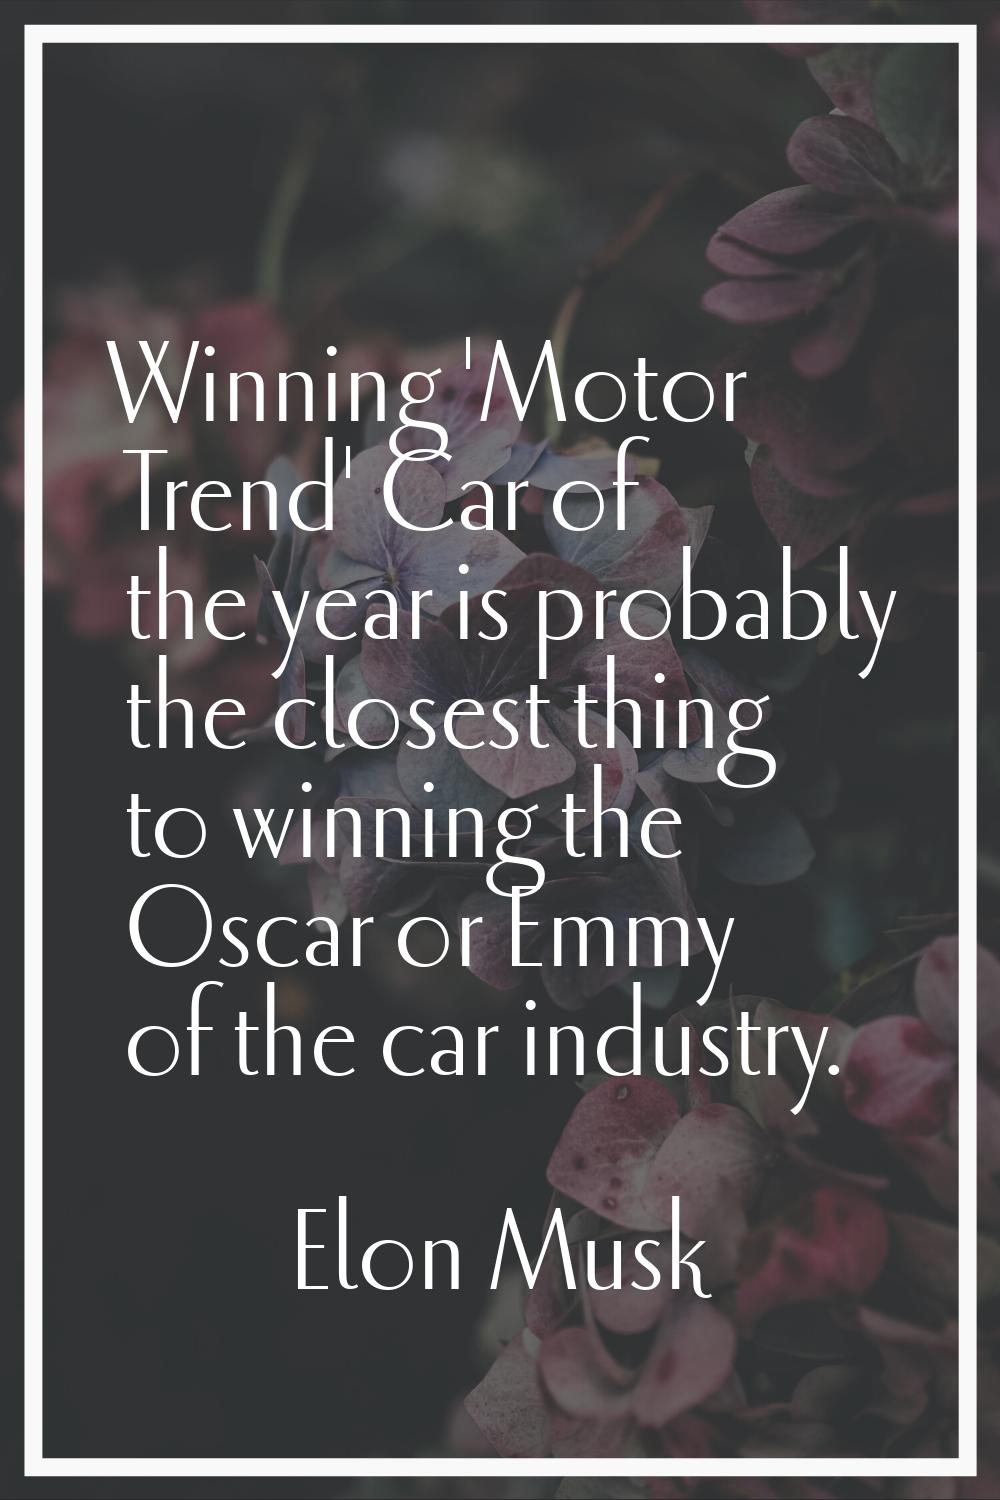 Winning 'Motor Trend' Car of the year is probably the closest thing to winning the Oscar or Emmy of